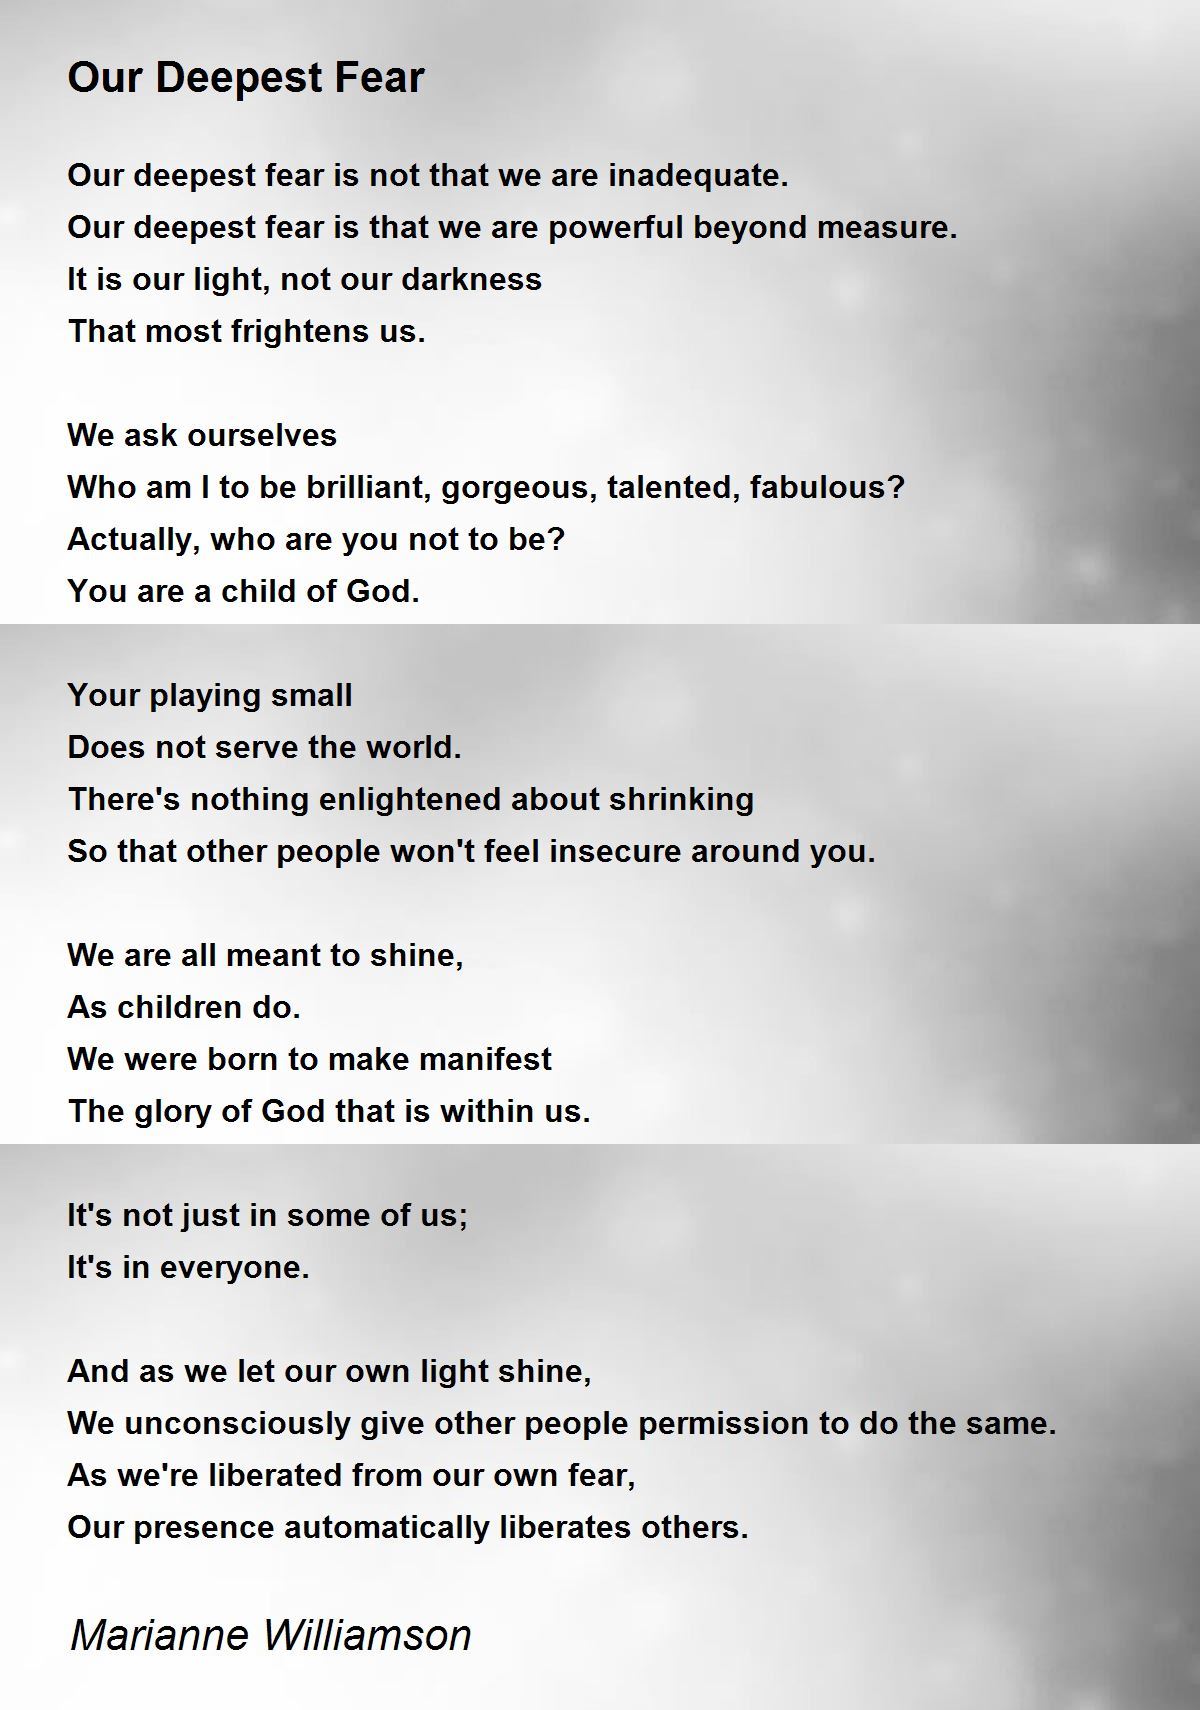 Our Deepest Fear - Our Deepest Fear Poem by Marianne Williamson